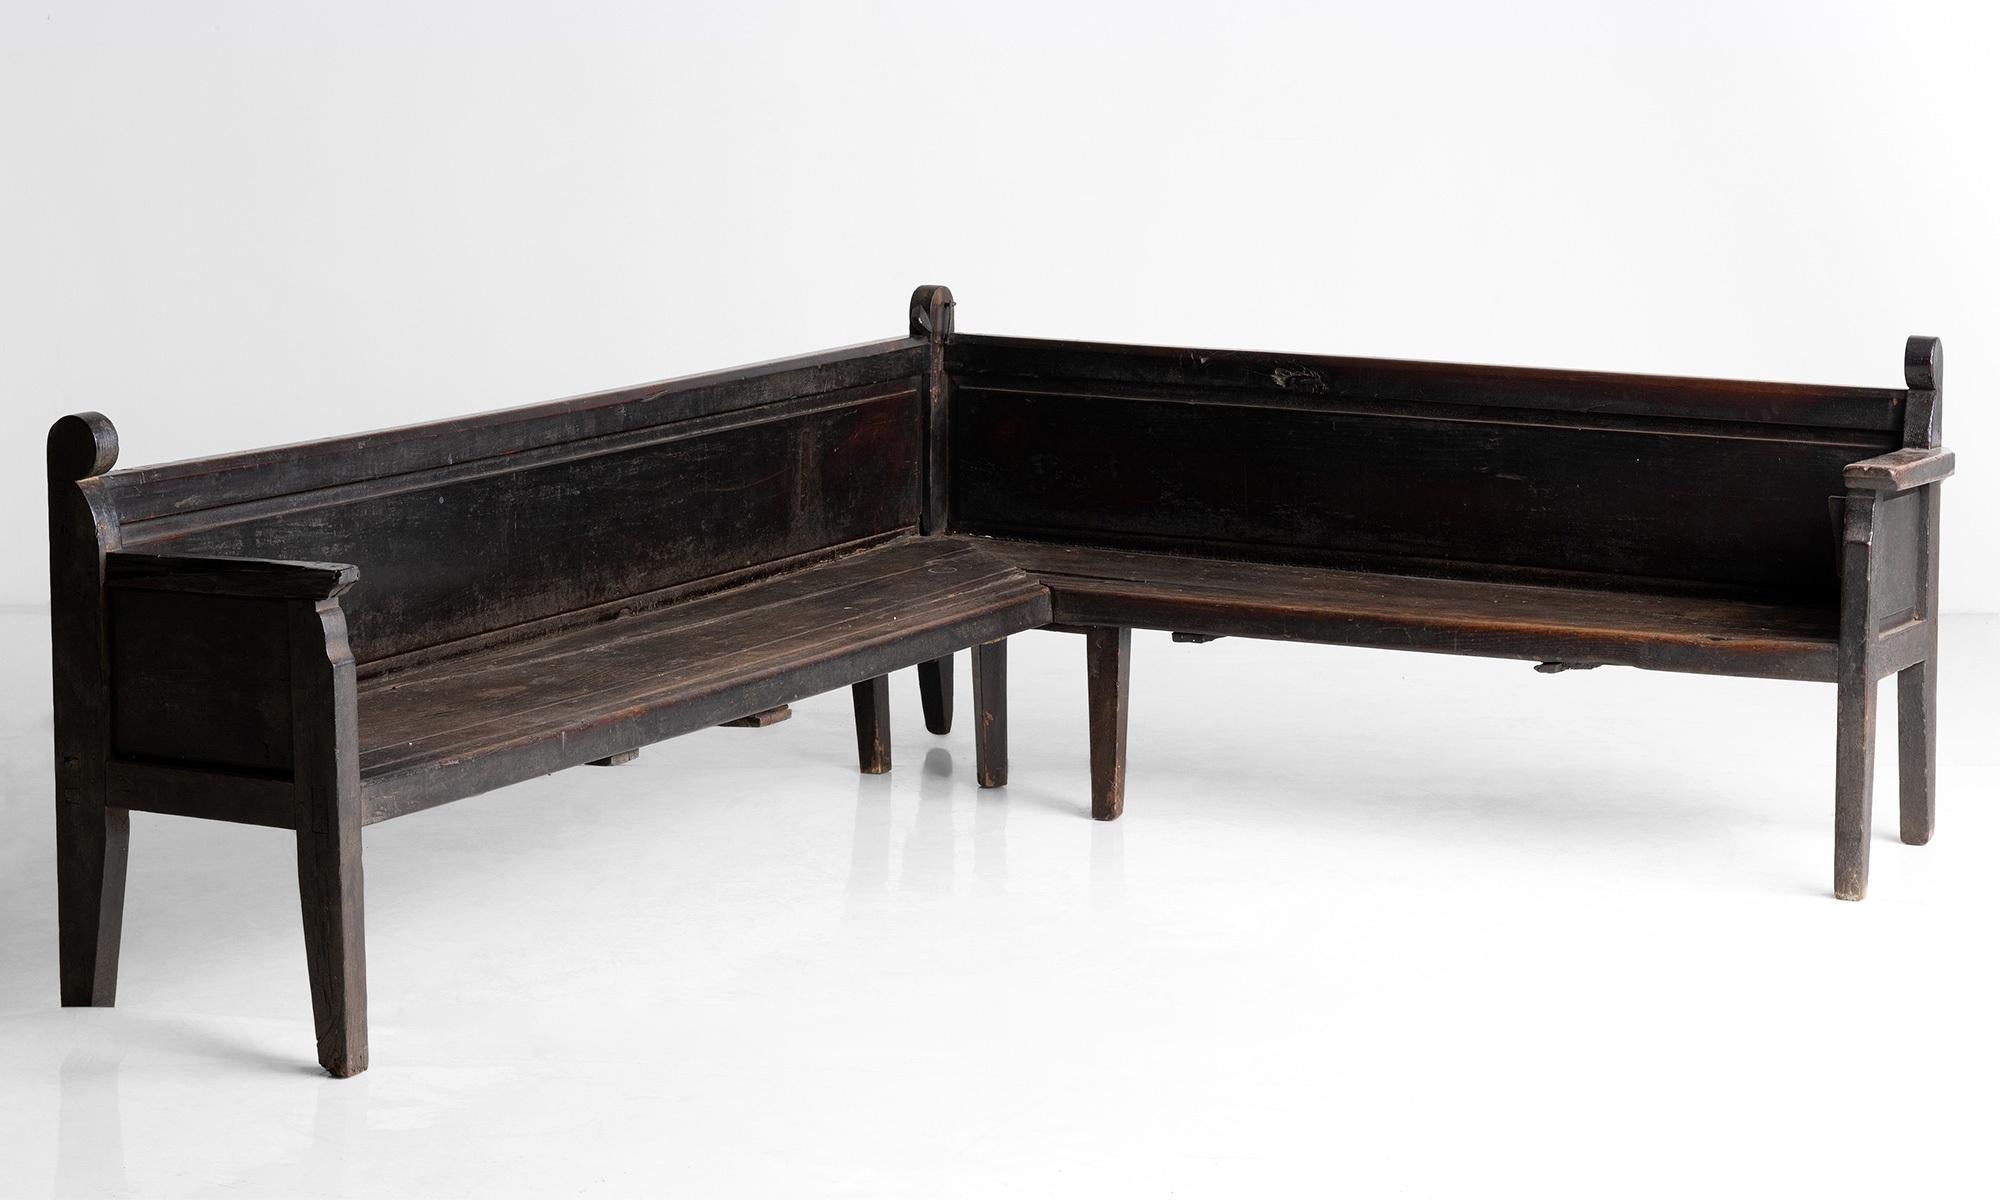 Galician corner bench.

Spain circa 1780.

Two section bench constructed in chestnut & walnut, likely.

Measures: 98.5